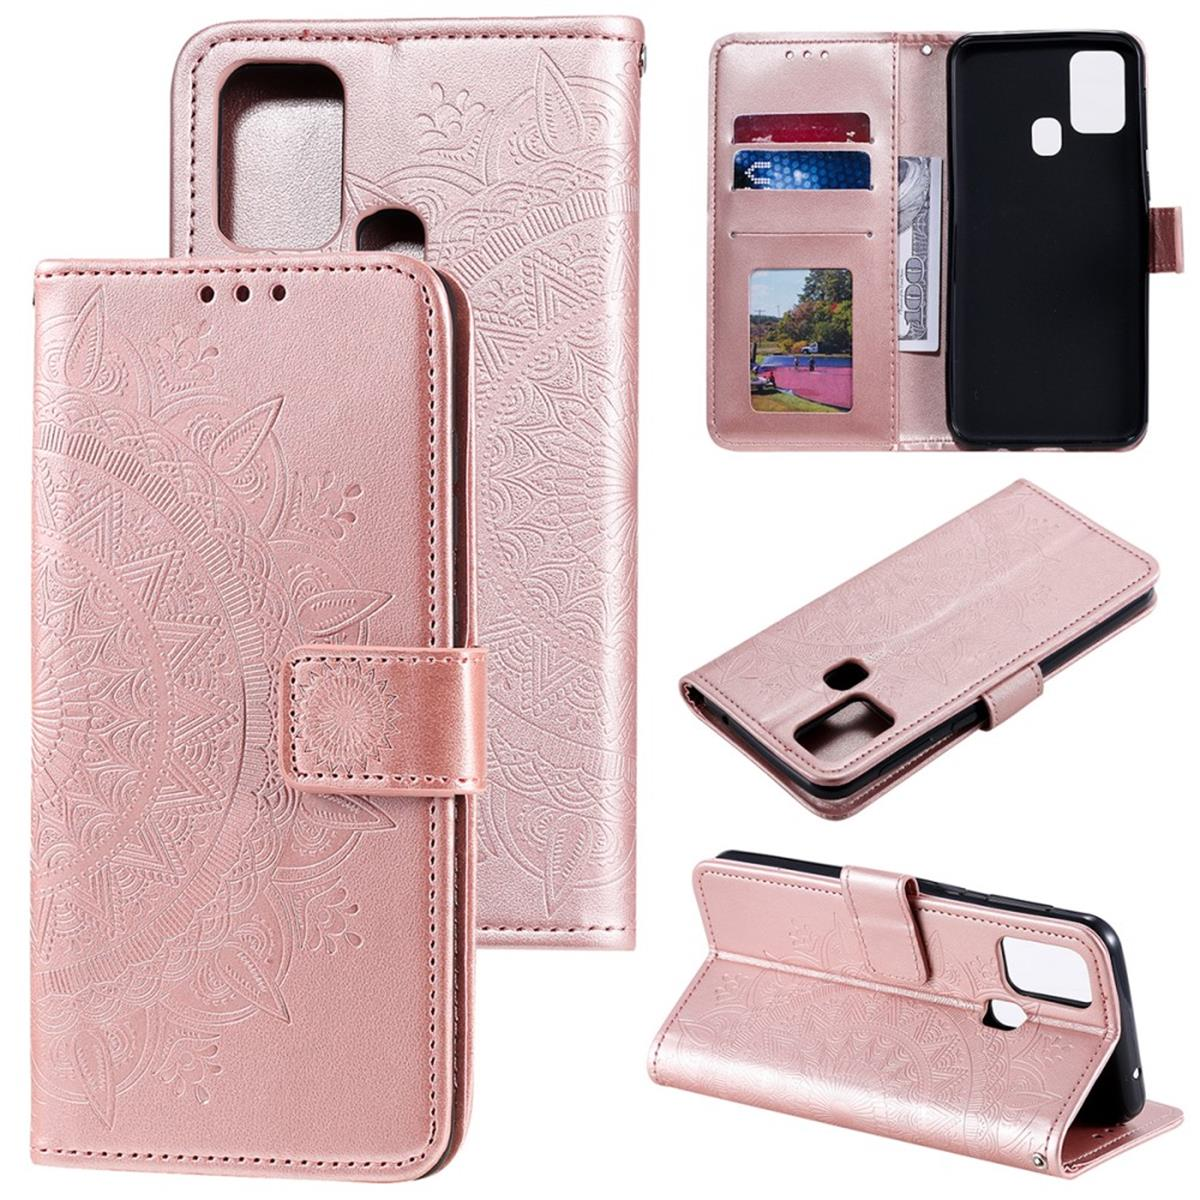 Samsung, Roségold COVERKINGZ A21s, Bookcover, mit Mandala Muster, Galaxy Klapphülle